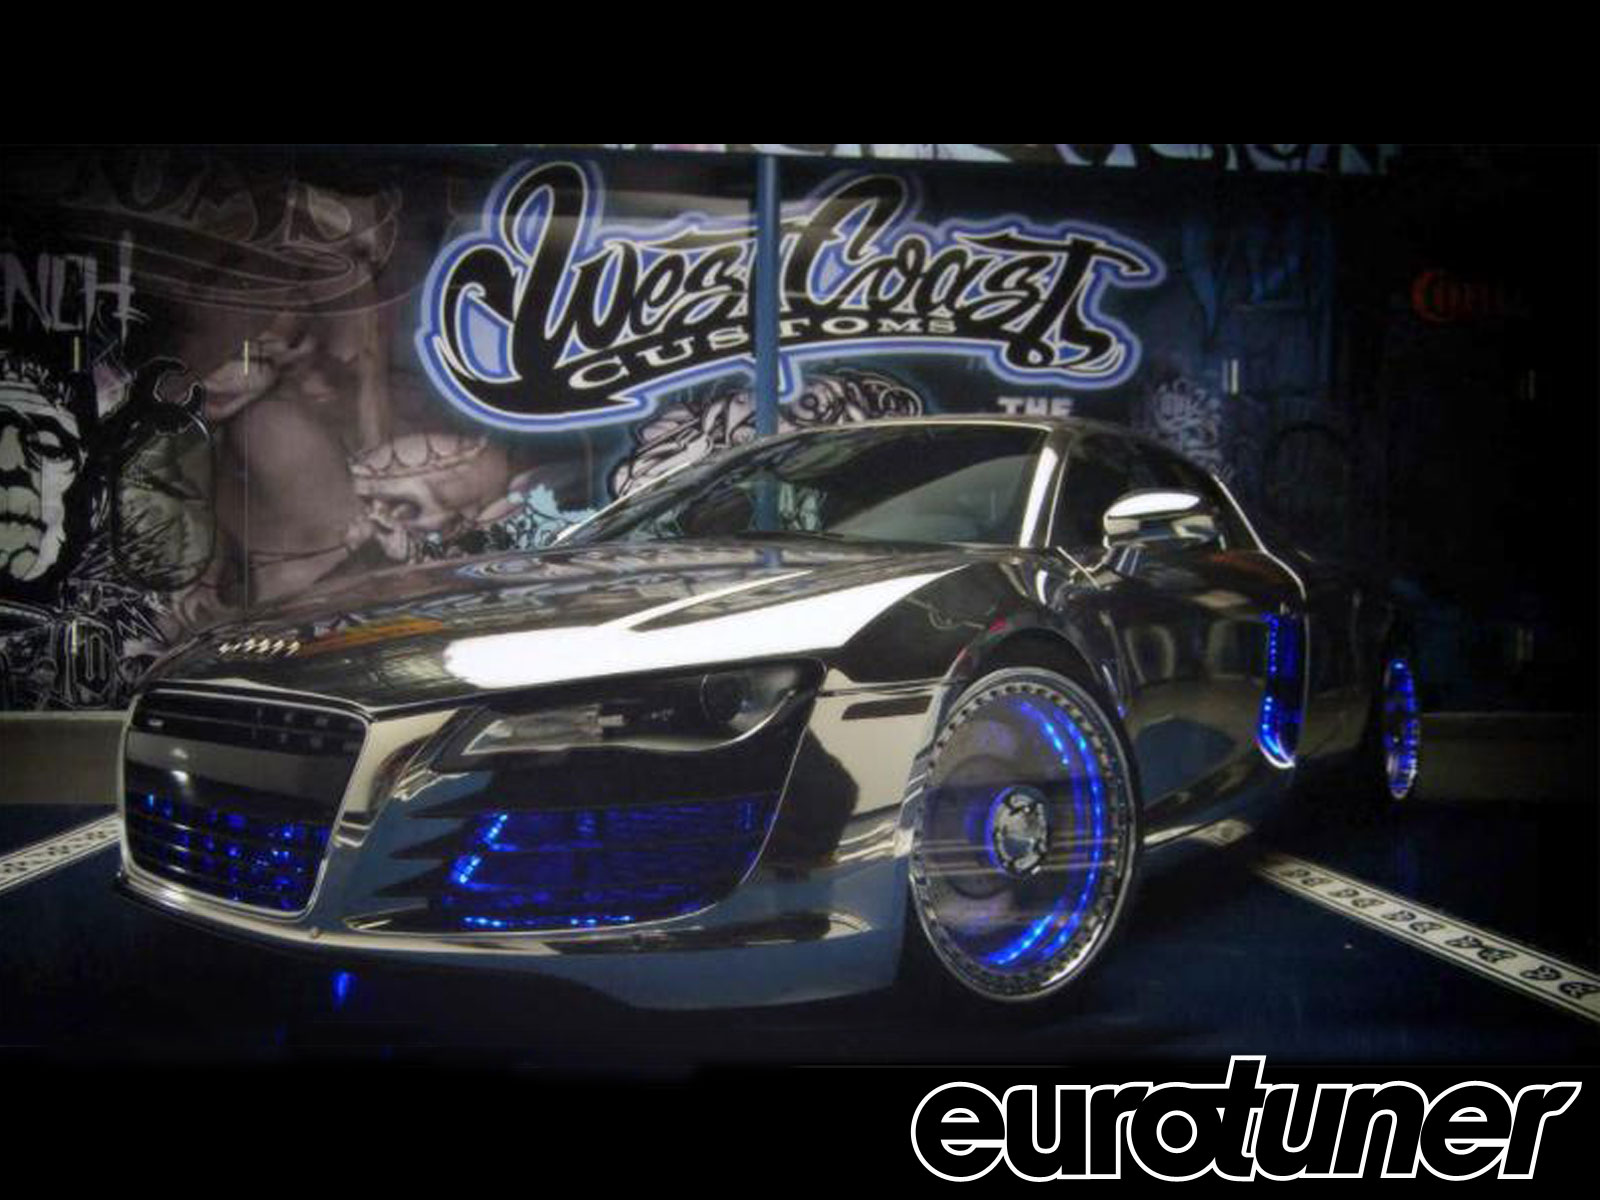 related pictures west coast customs wallpaper Car Pictures 1600x1200